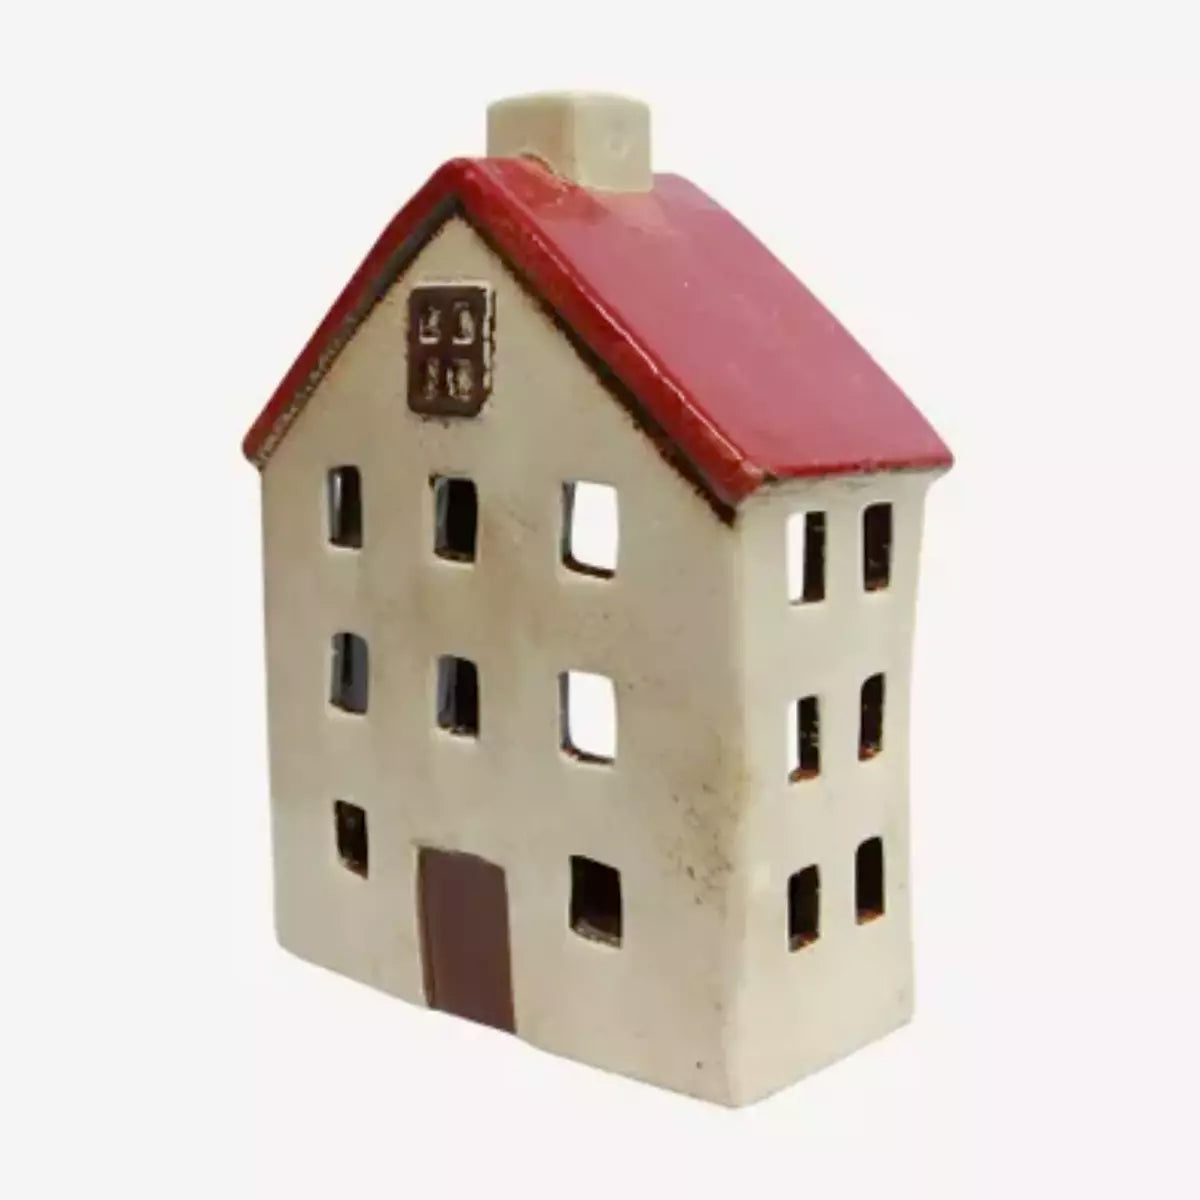 A small figurine of a house on a white background, perfect as a French Country Collections Ceramic Building in the Christmas Village Wide Chalet.